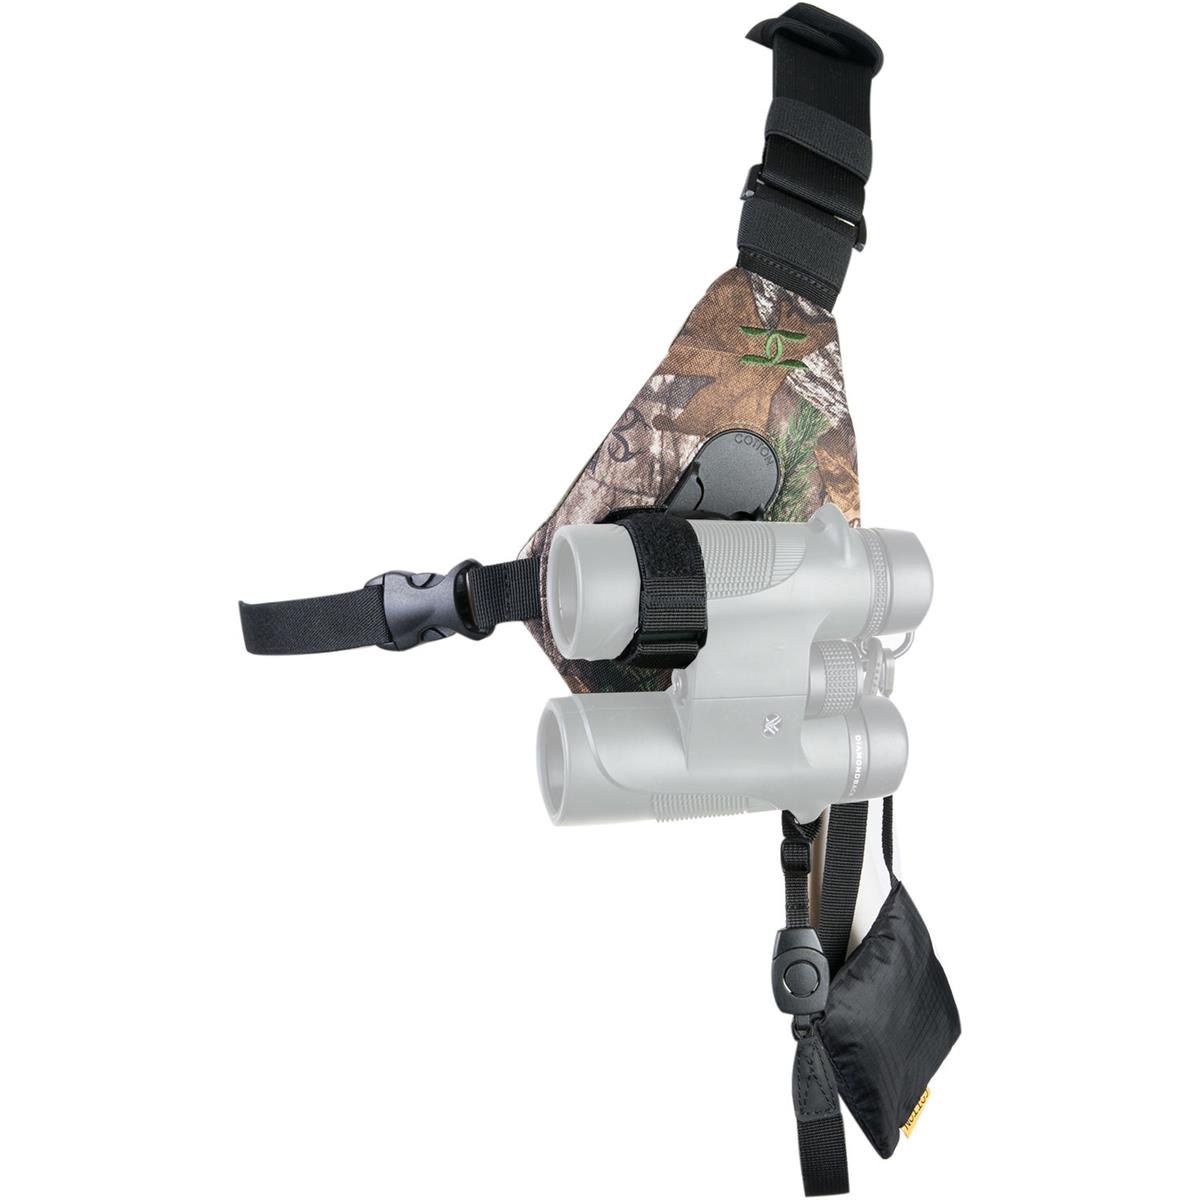 Image of Cotton Carrier SKOUT Sling-Style Harness for Binoculars